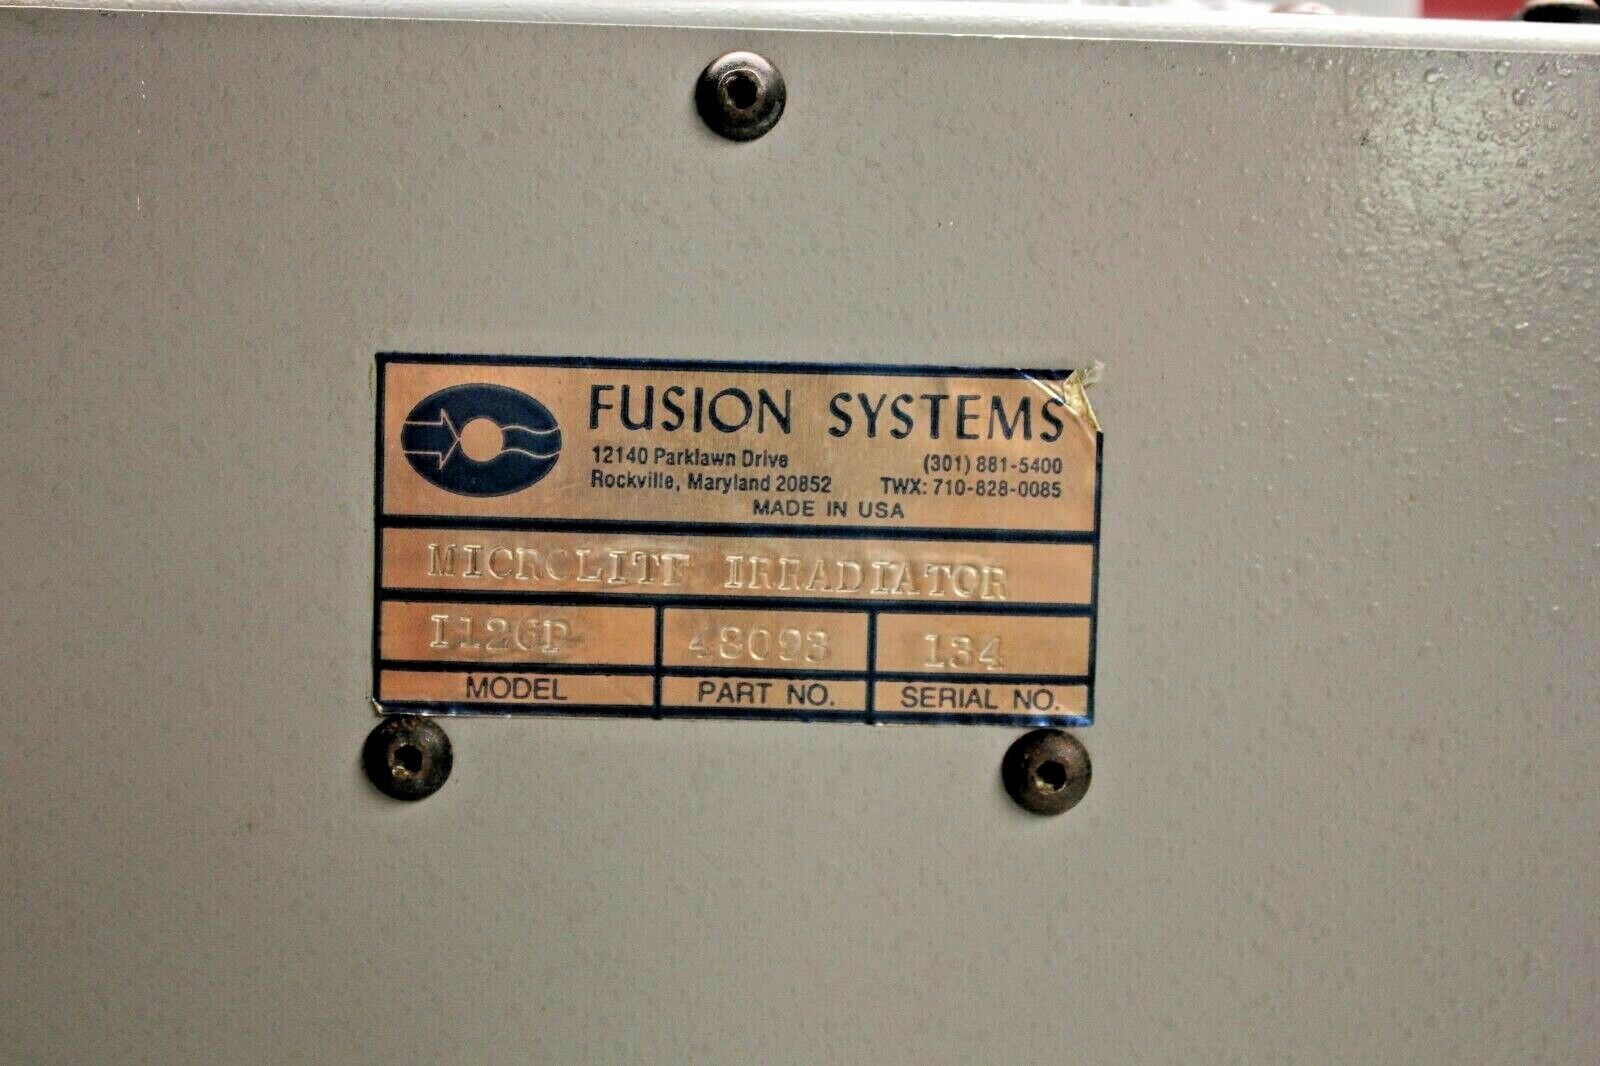 FUSION SYSTEMS MICROLITE IRRADIATOR 1126P W/SHUTTER ASSEMBLY 54262  FUSION SYSTEMS 1126P - фотография #5